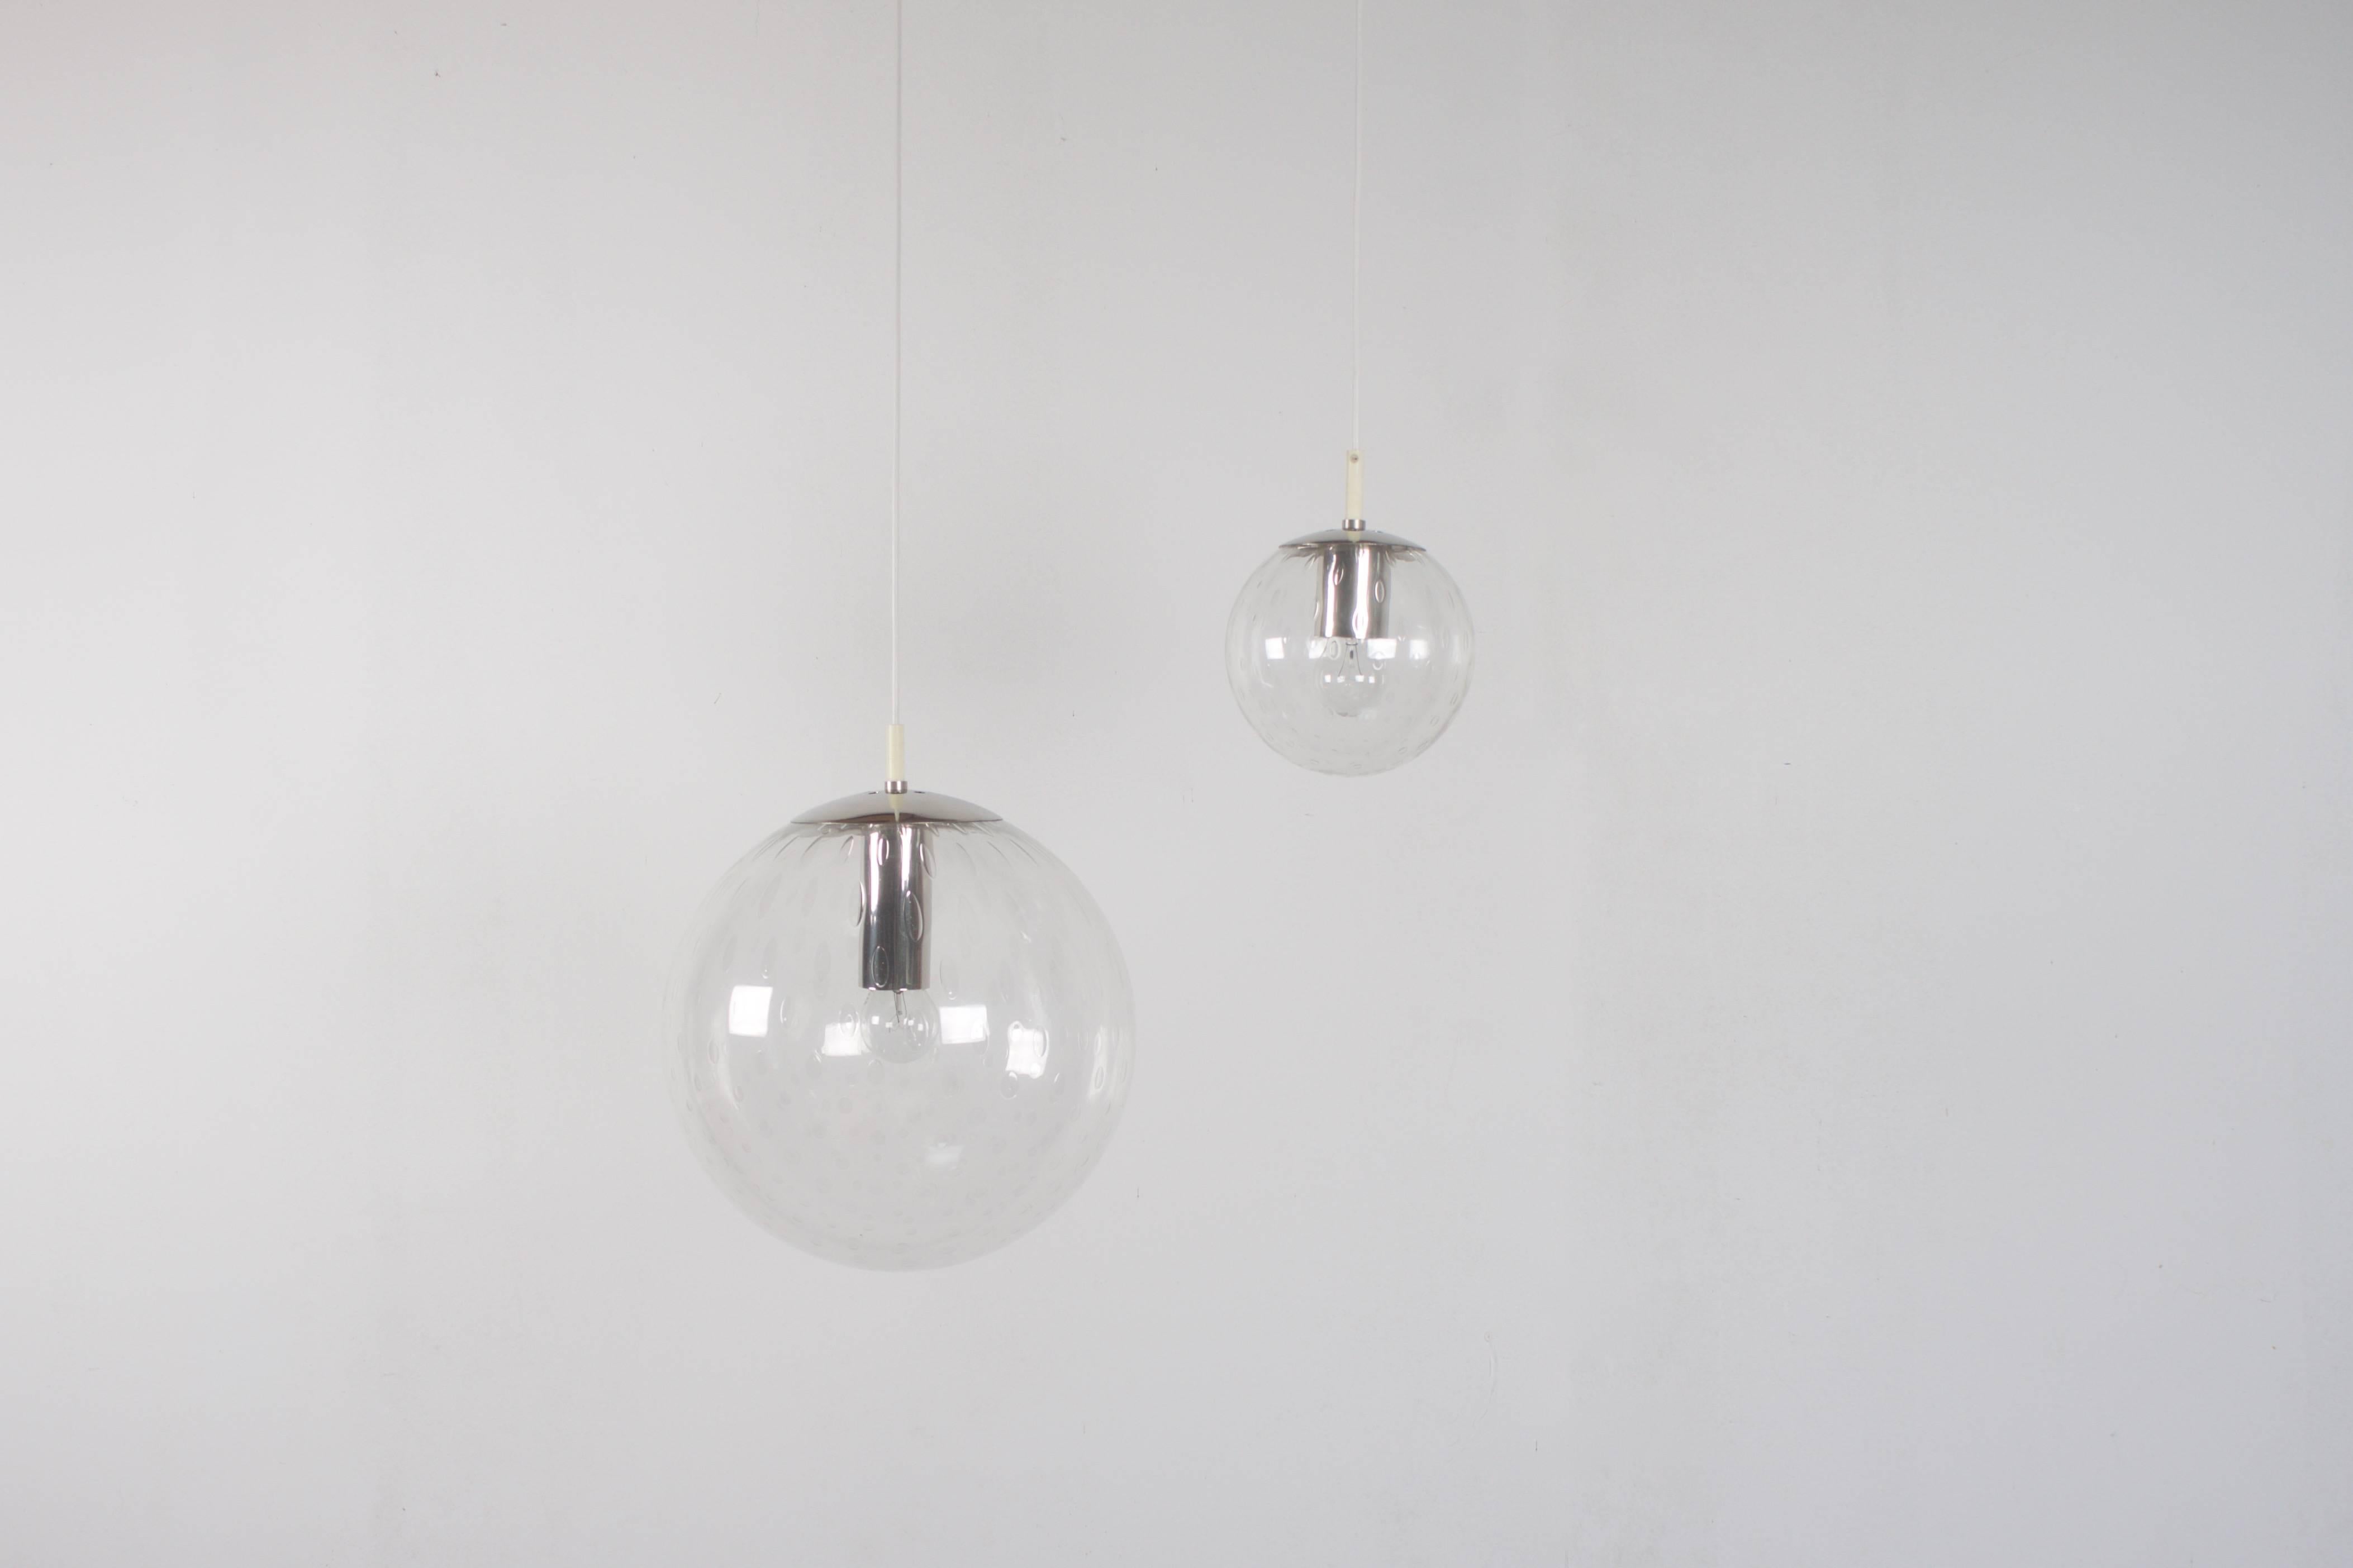 20th Century Large ‘Licht-drops’ Globe Pendant by RAAK Amsterdam, 1960s For Sale